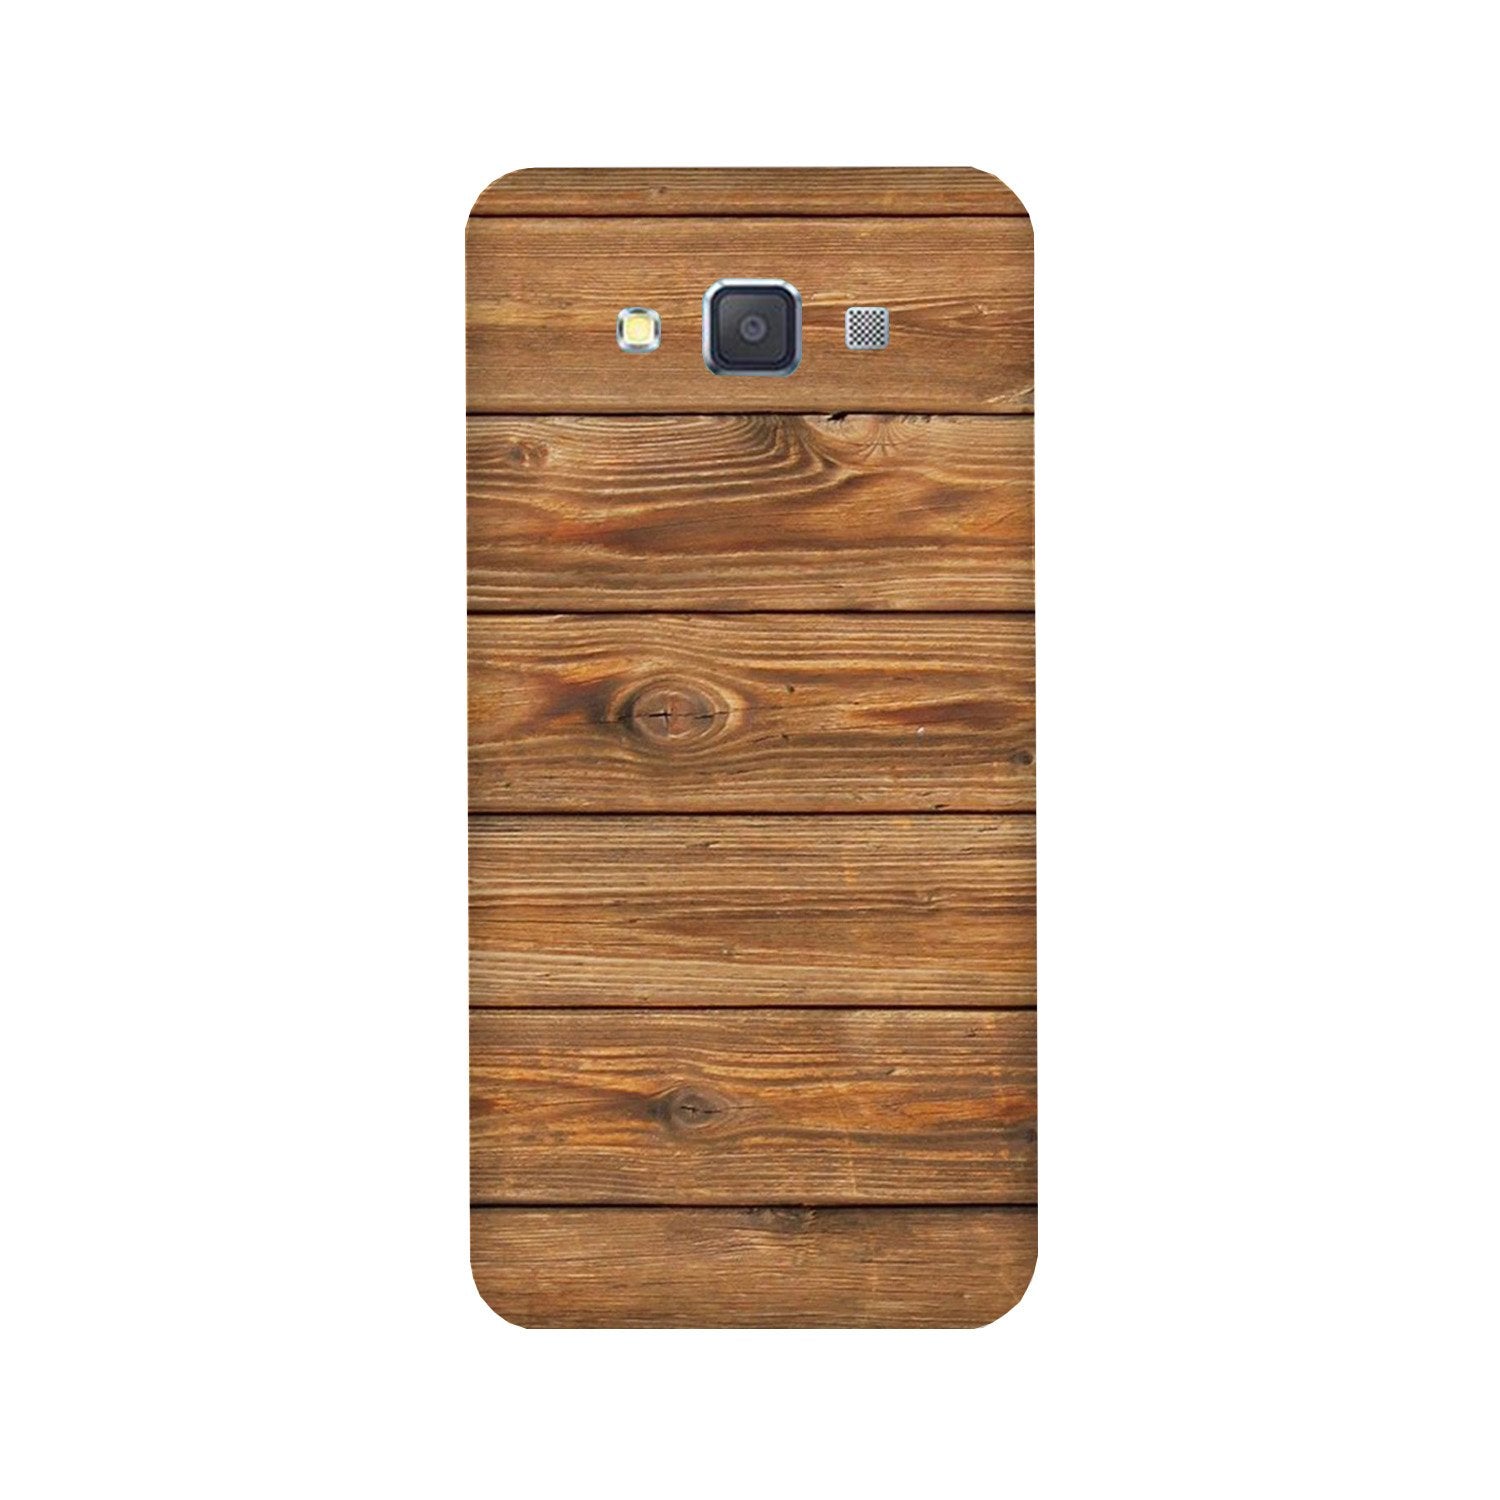 Wooden Look Case for Galaxy Grand Prime(Design - 113)